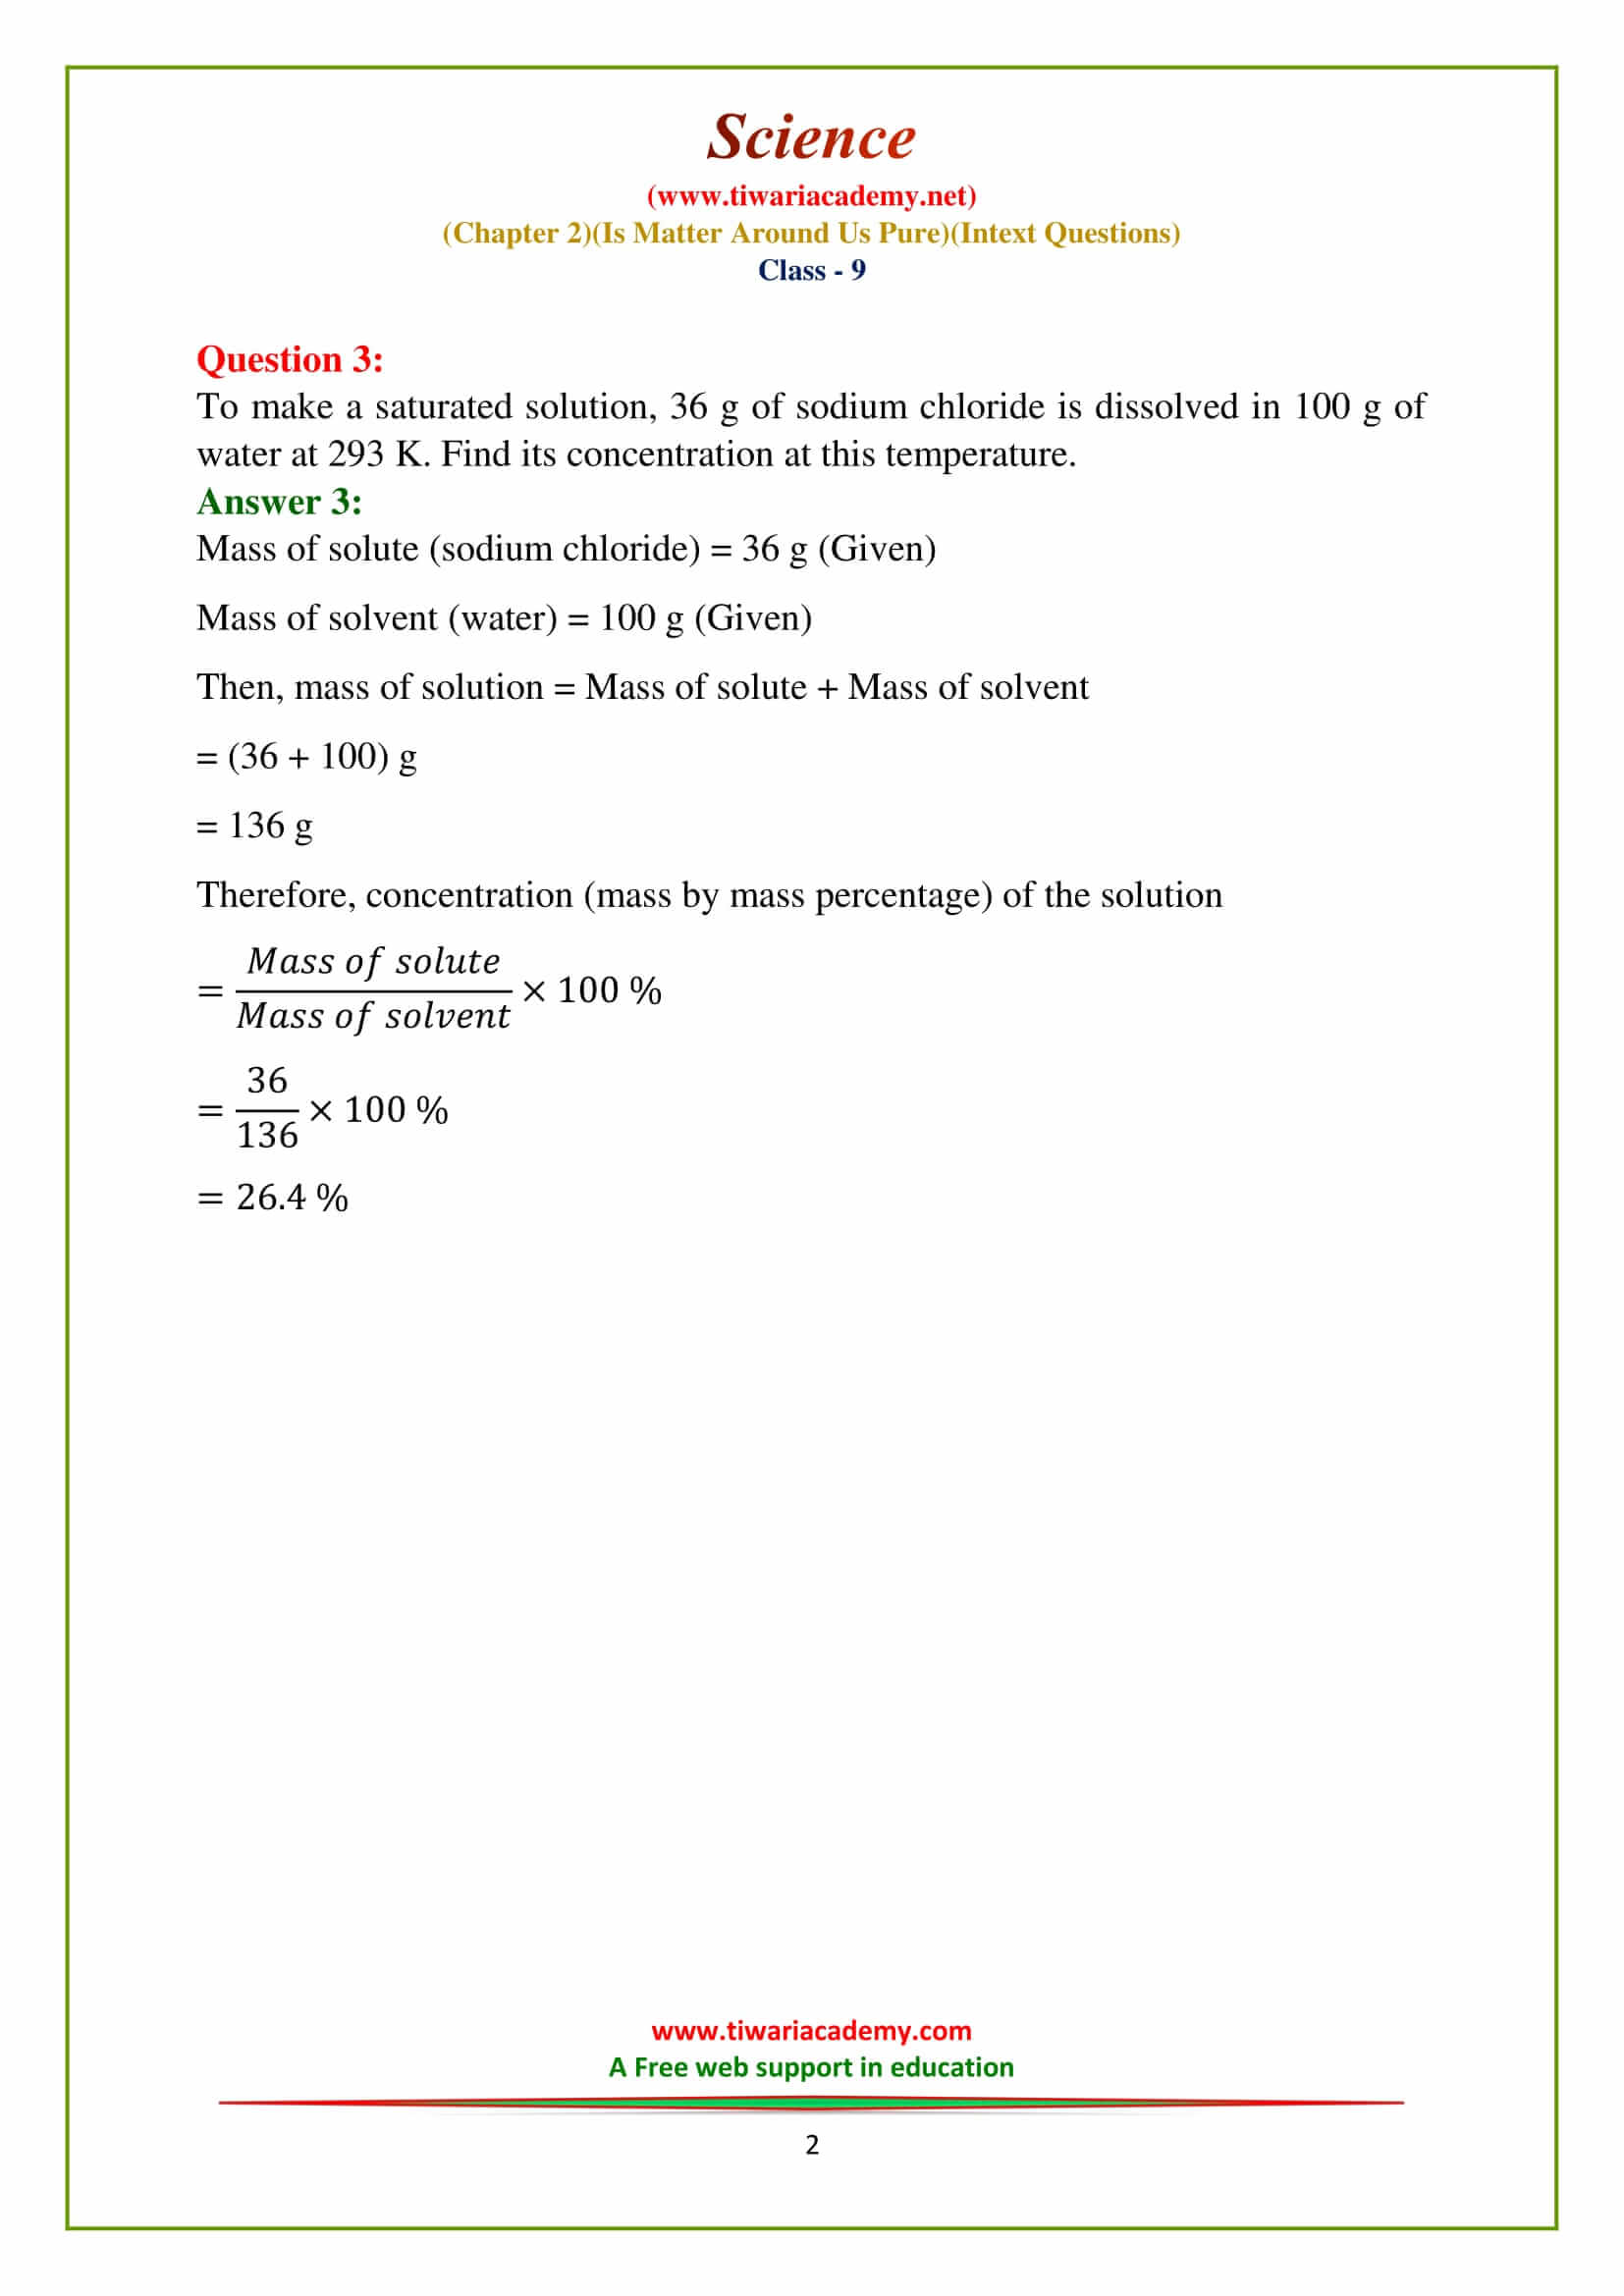 NCERT Solutions for Class 9 Science Chapter 2 Is Matter Around Us Pure page 18 questions answres in english medium